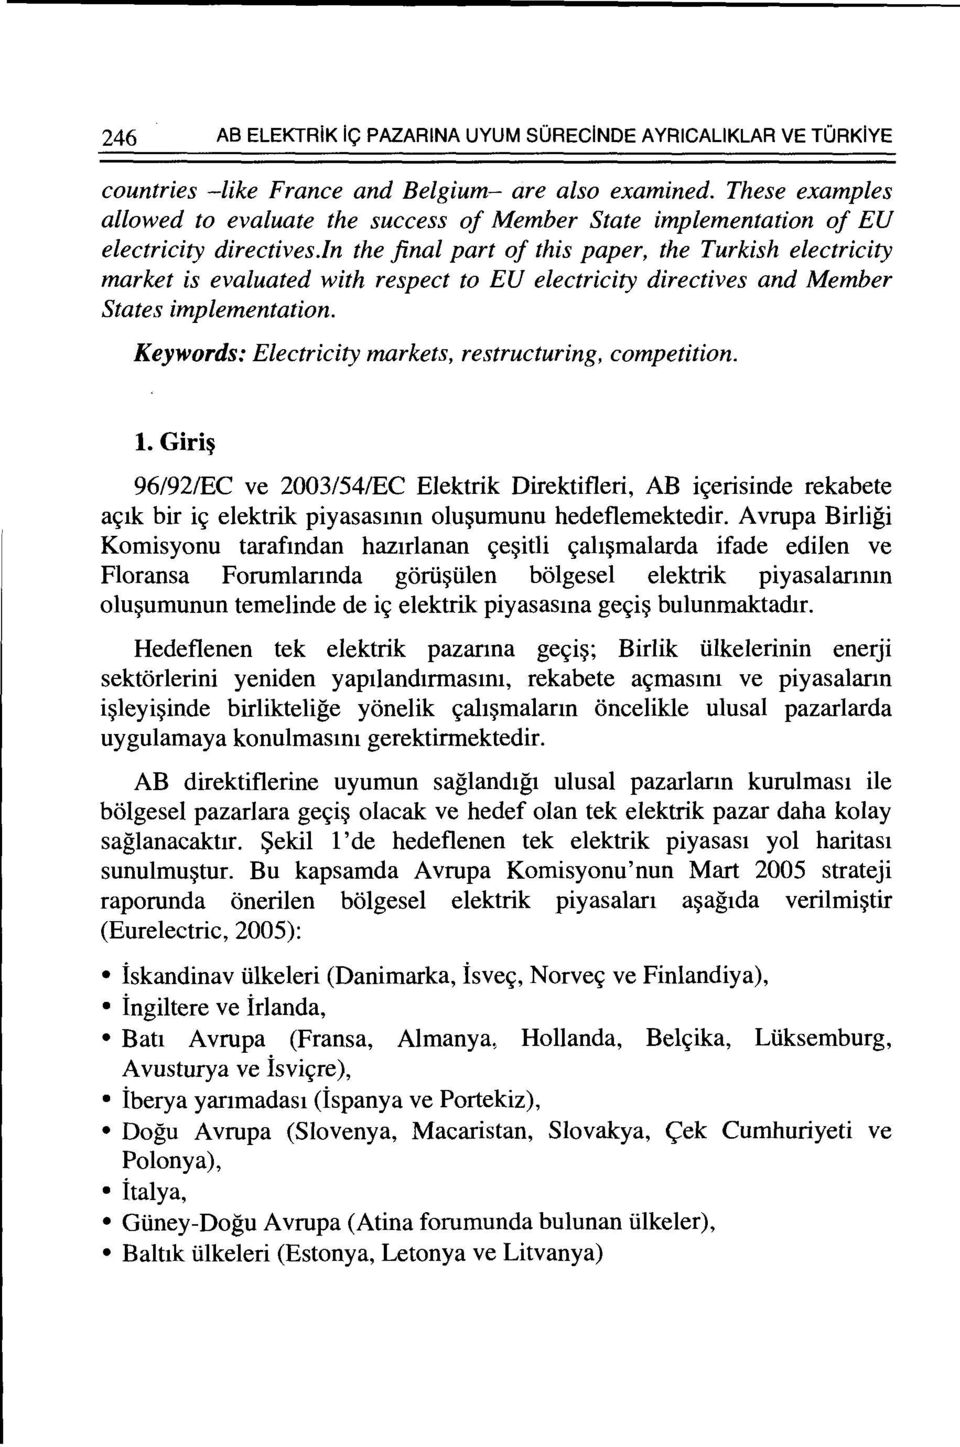 ln the final part of this paper, the Turkish electricity market is evaluated with respect to EU electricity directives and Member States implementation.